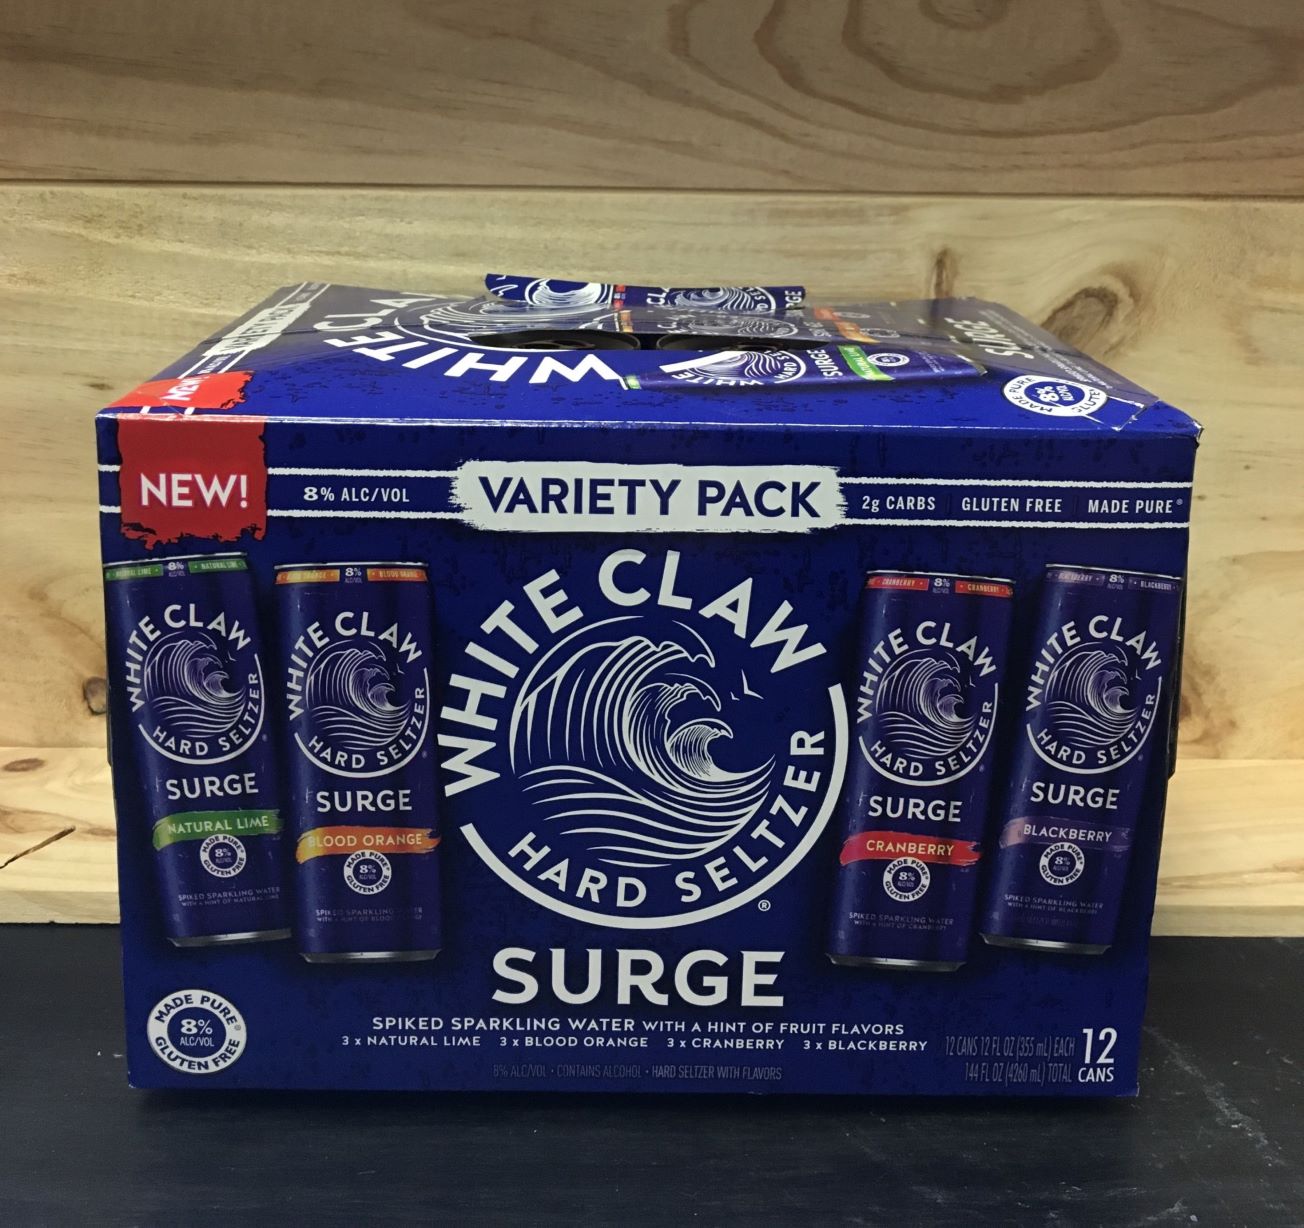 20 White Claw Surge Nutrition Facts - Facts.net